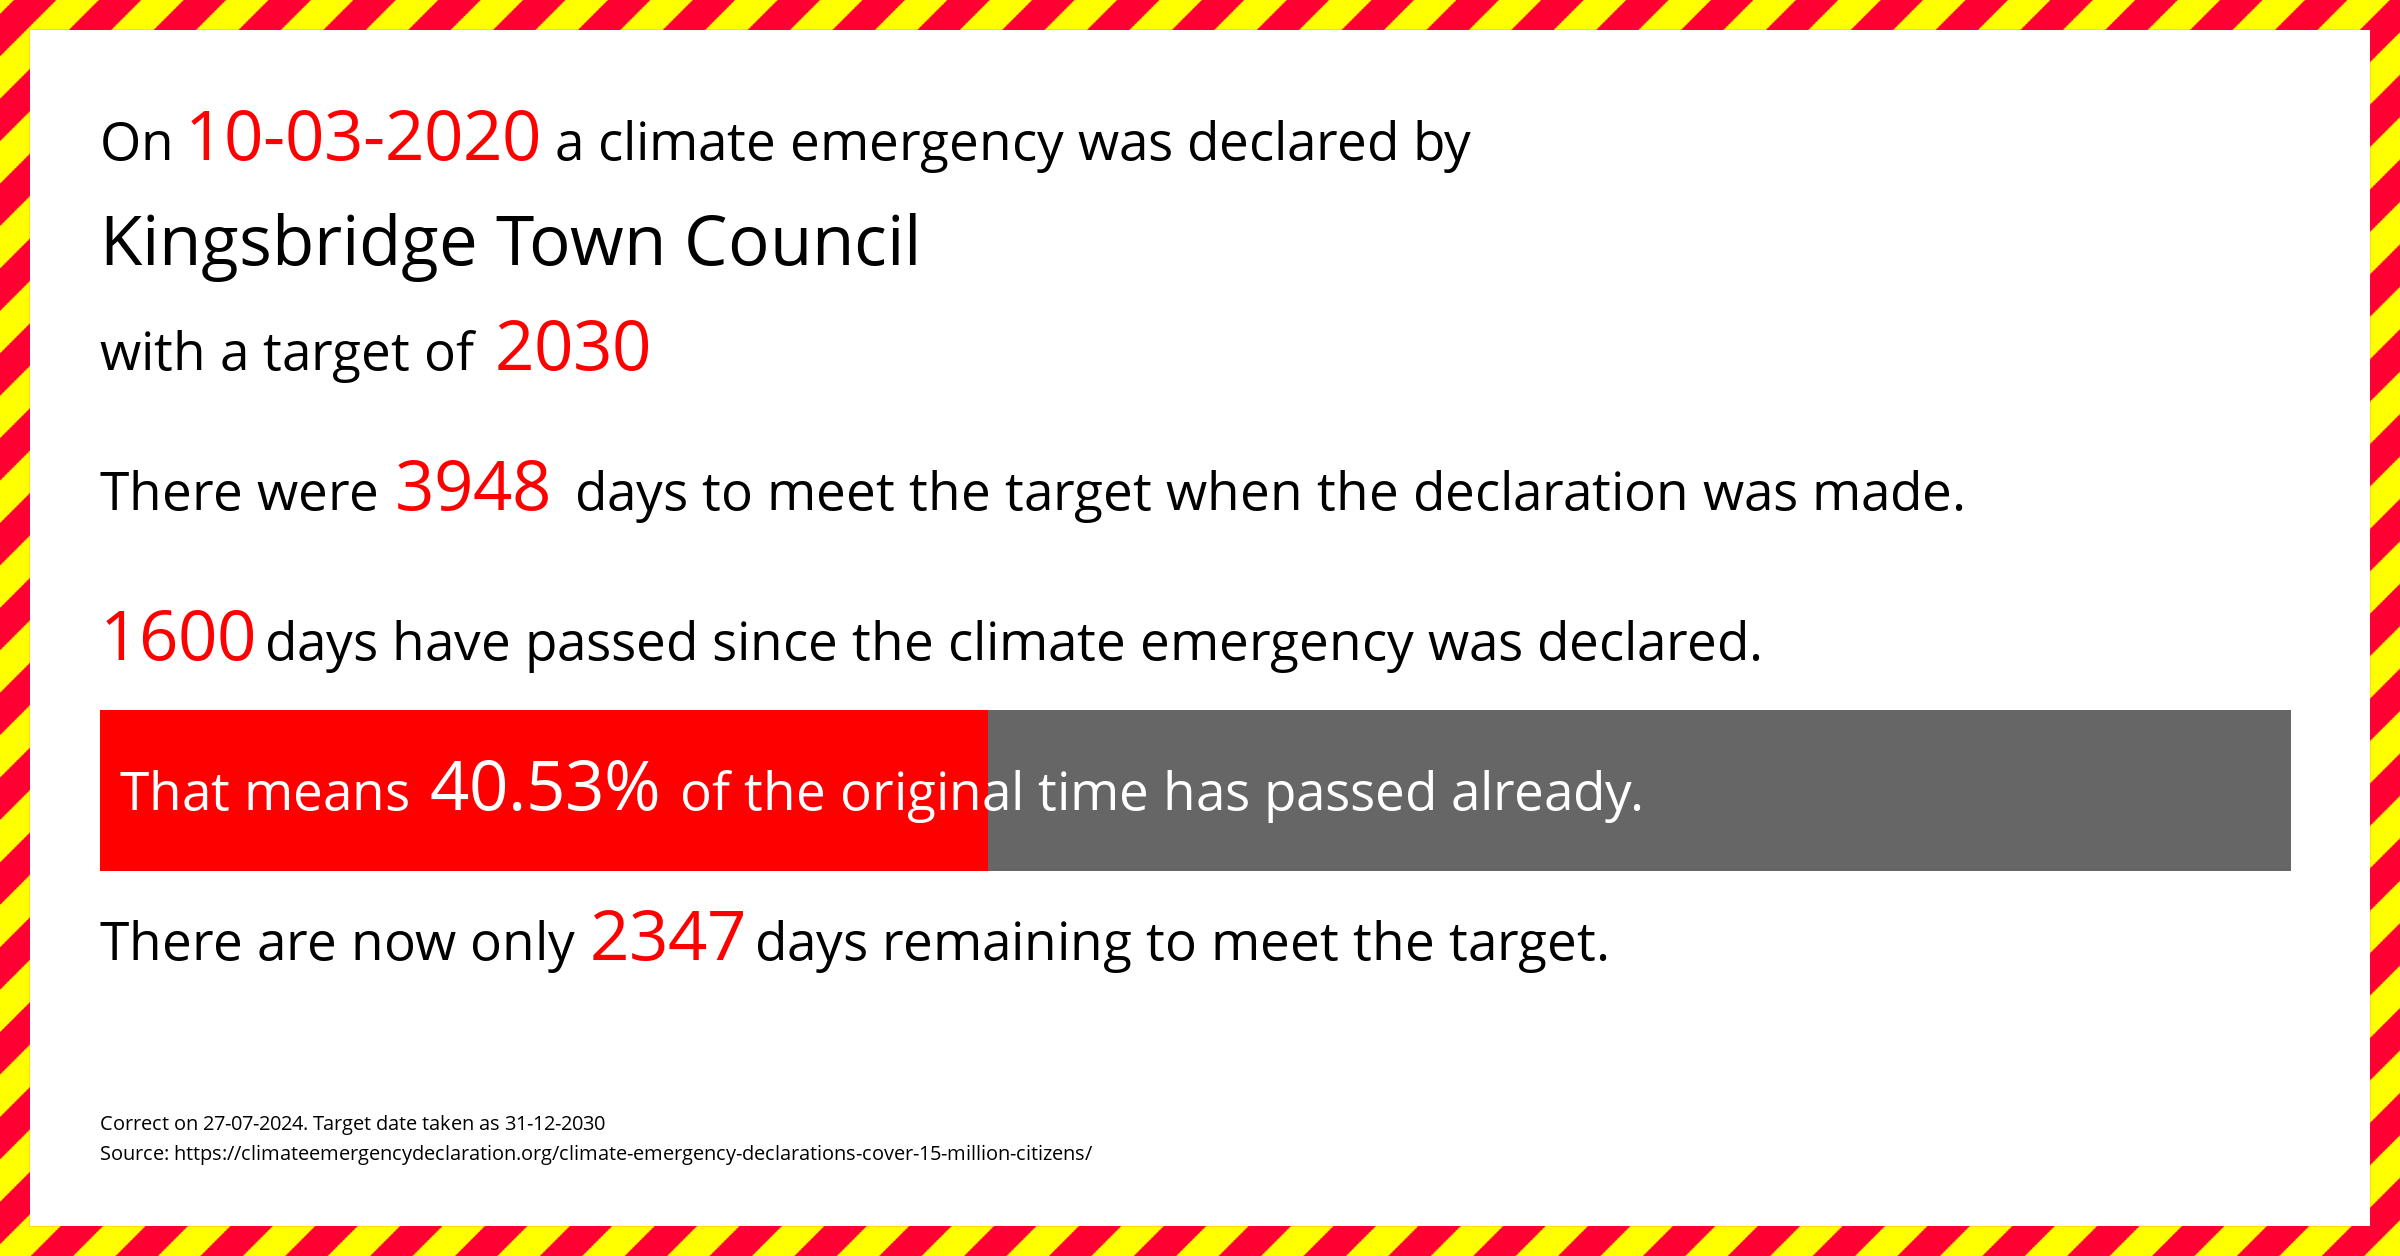 Kingsbridge Town Council declared a Climate emergency on Tuesday 10th March 2020, with a target of 2030.